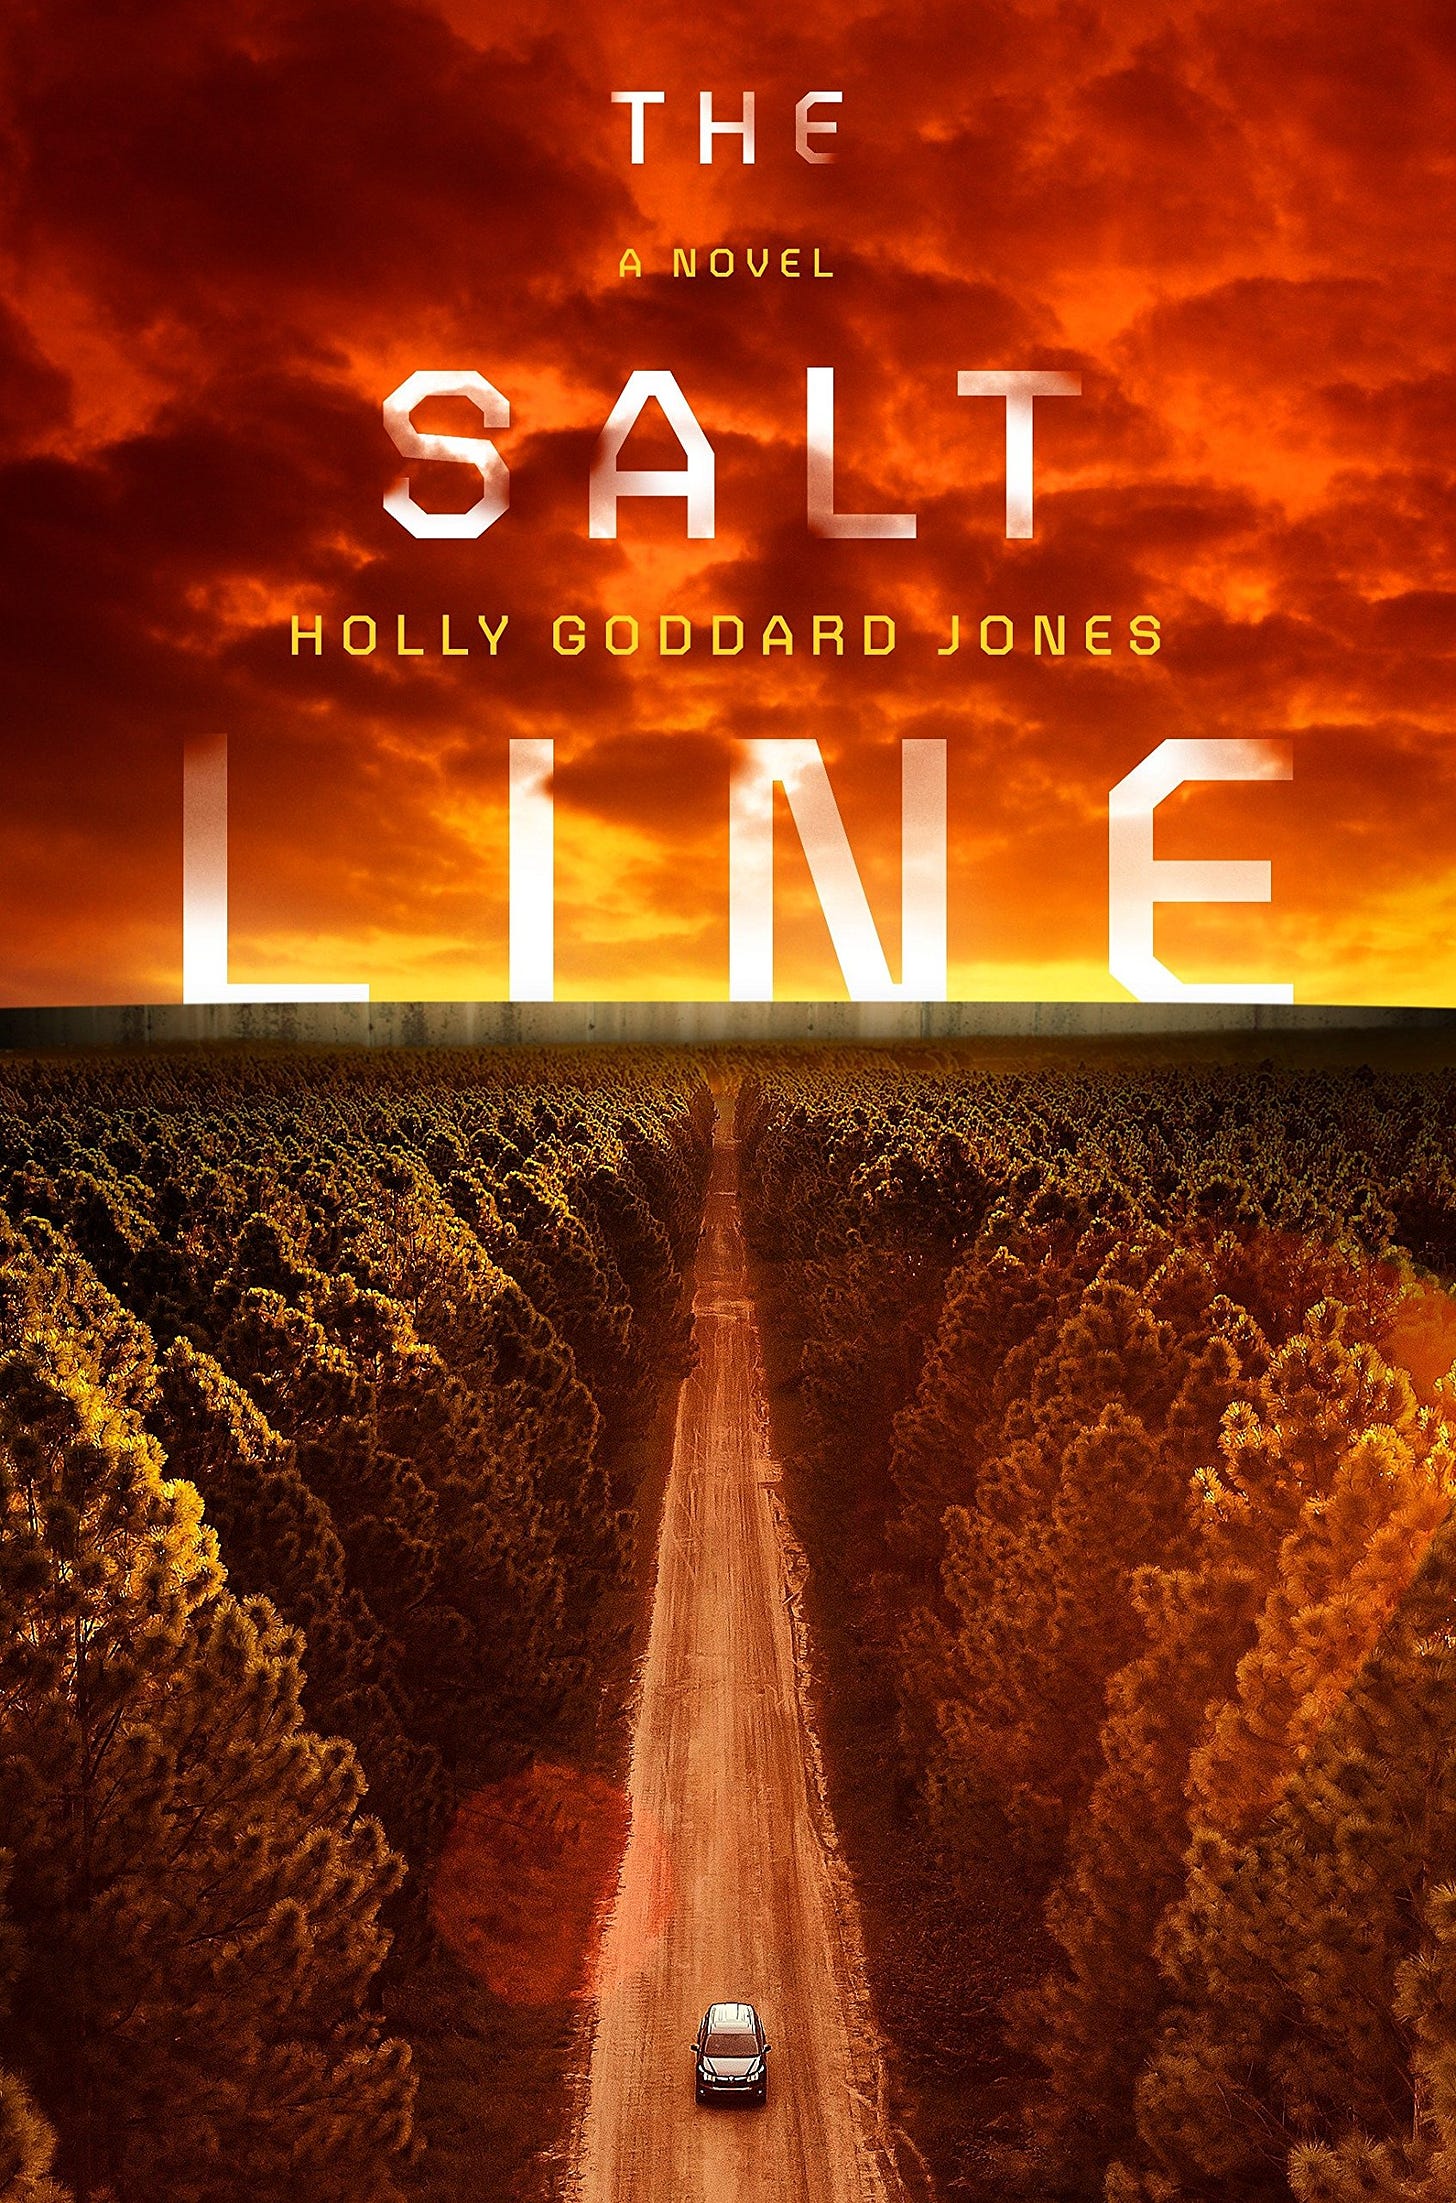 Book cover of The Salt Line